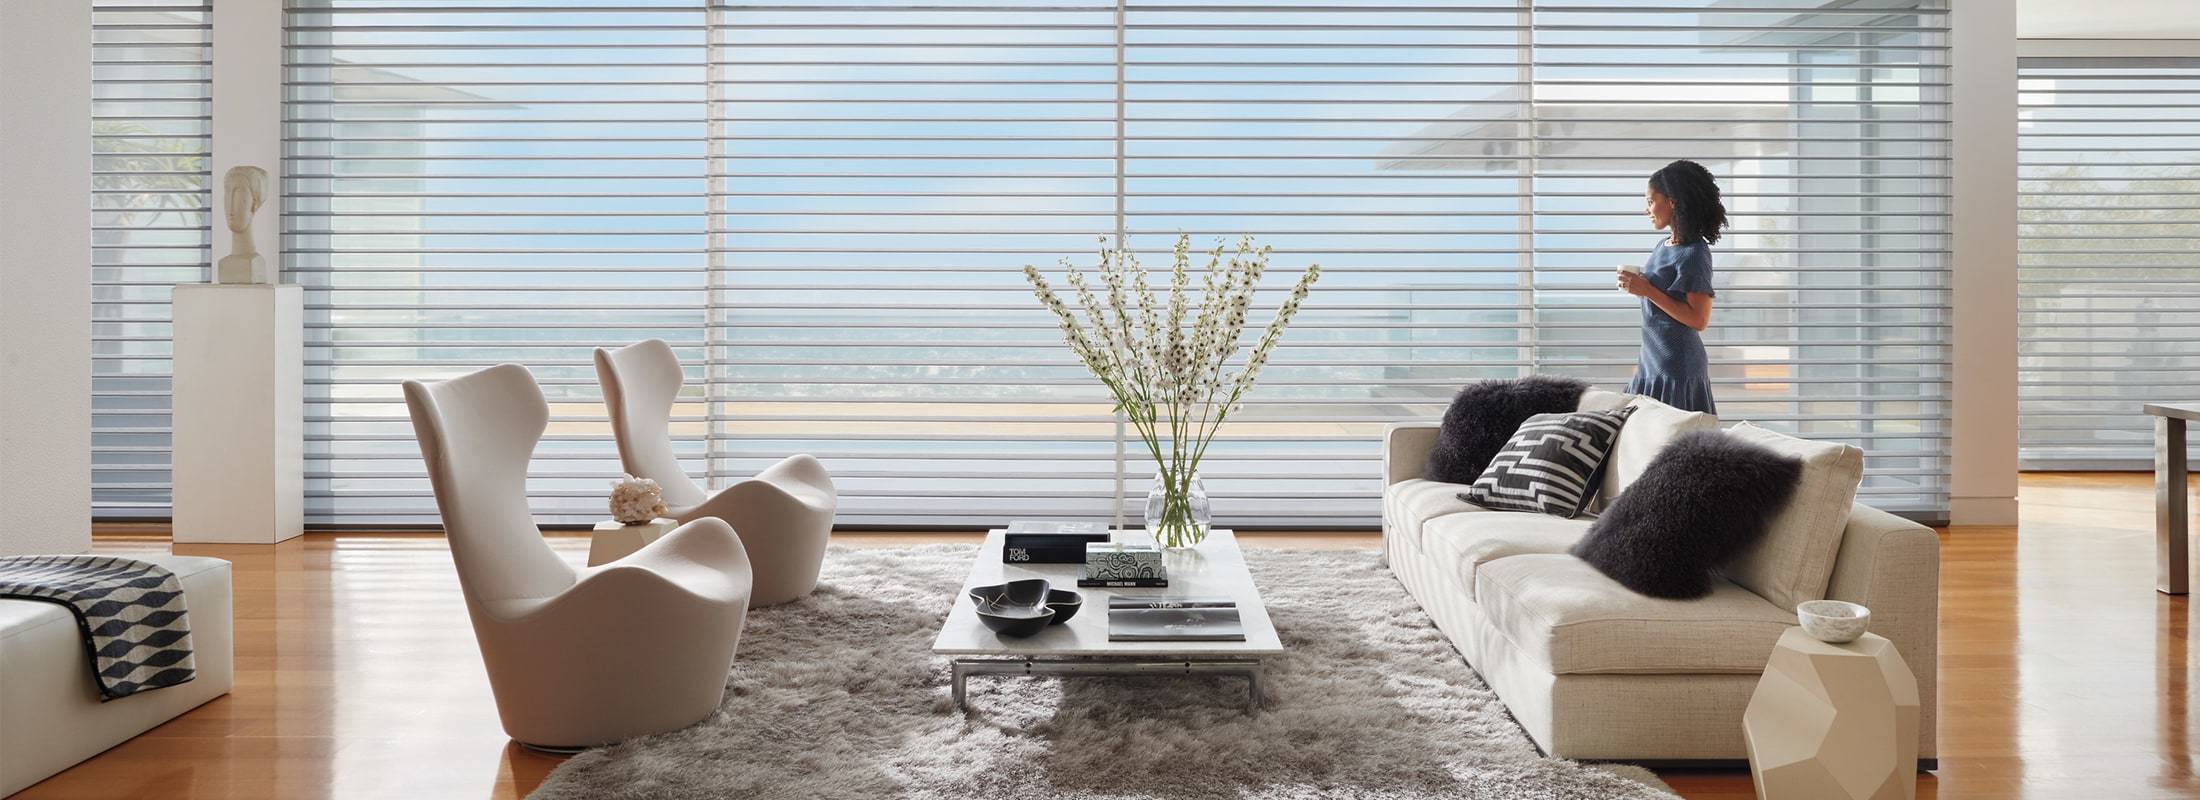 Silhouette® Window Shadings feature soft adjustable fabric vanes that appear to be floating between two sheer fabric panels that beautifully diffuse harsh sunlight. Simply tilt the vanes to achieve your desired level of light and privacy. Learn more about Silhouette® Window Shadings.